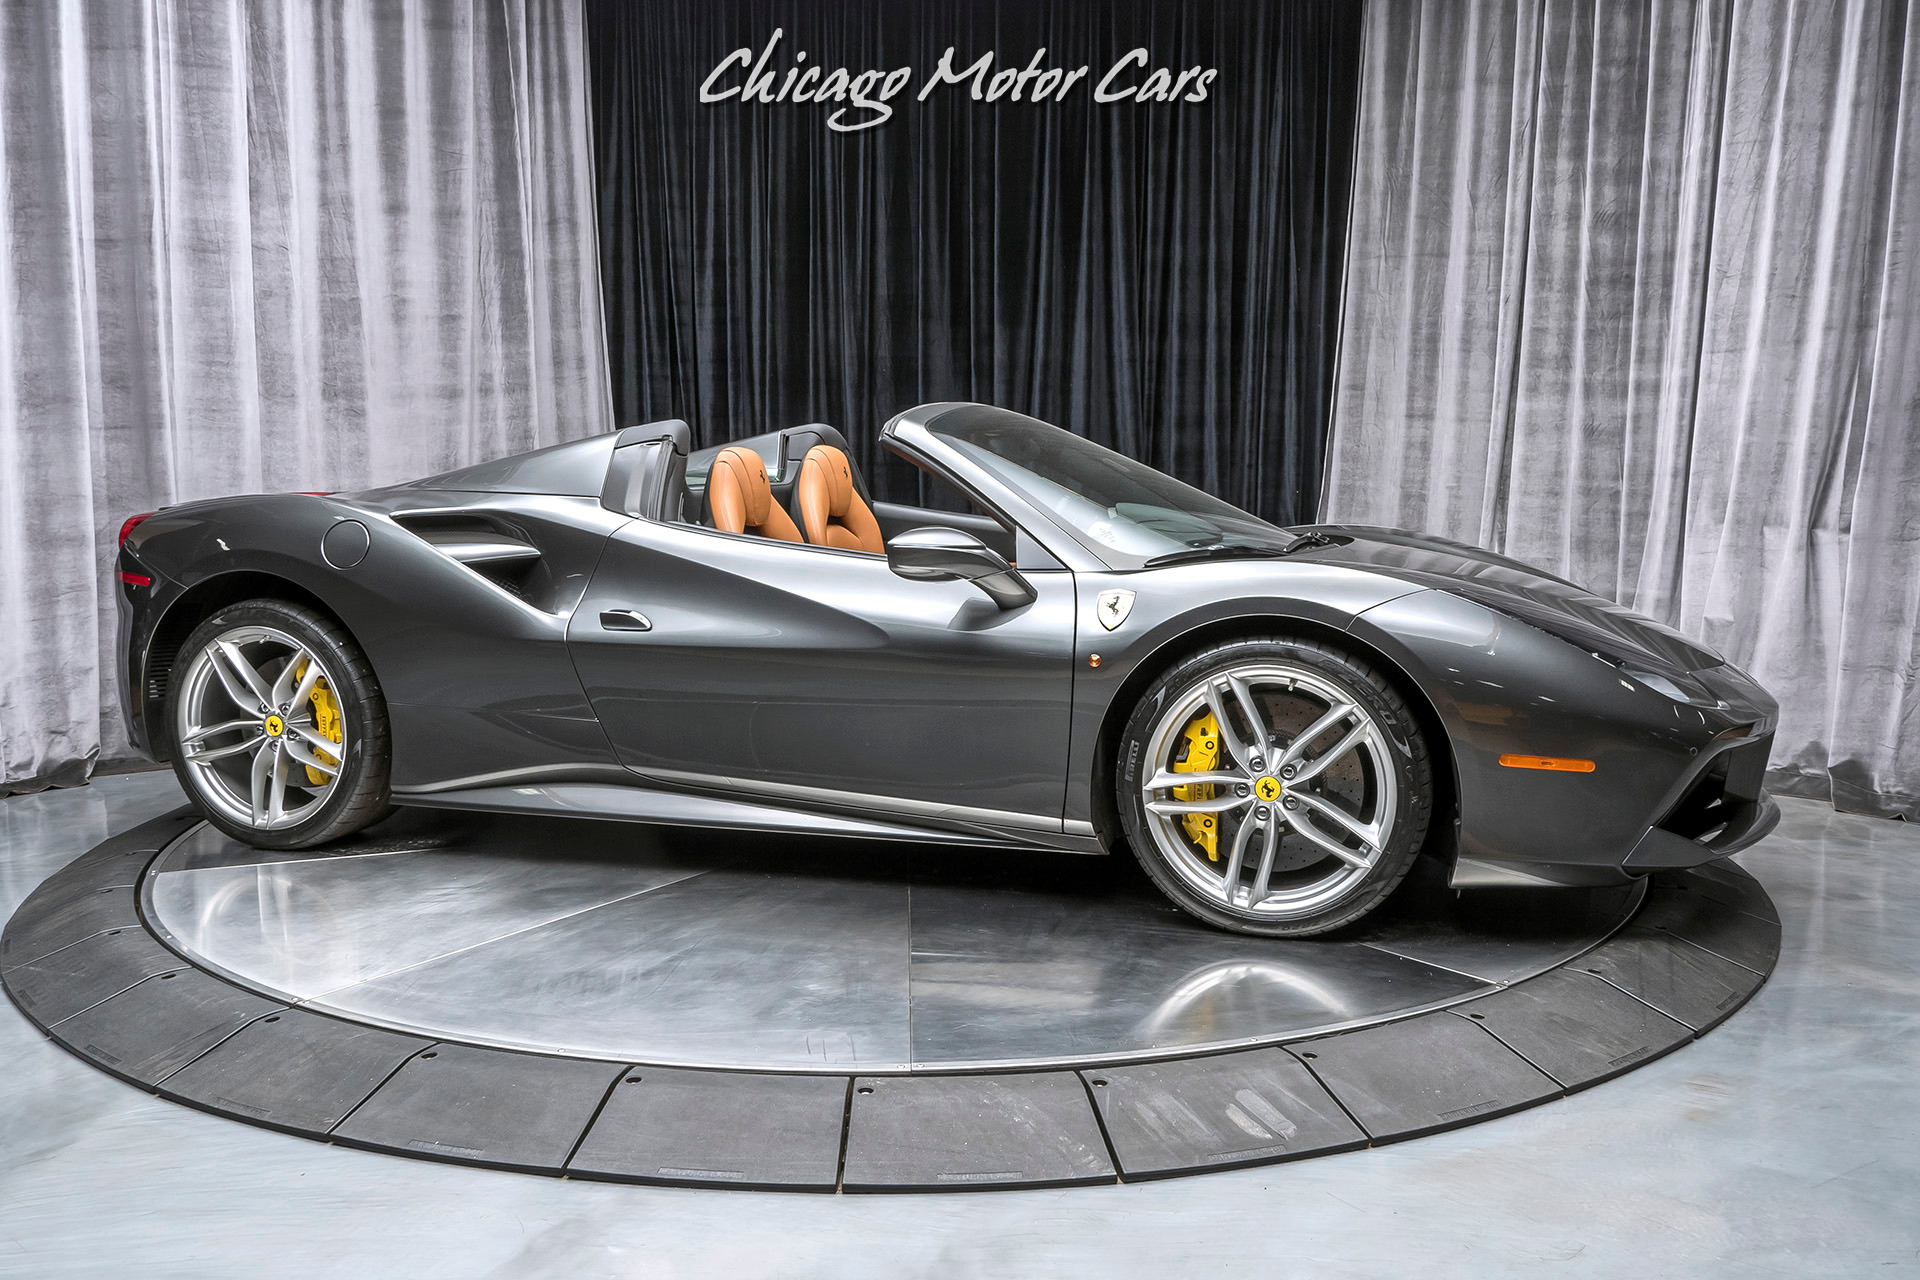 Used 2016 Ferrari 488 Spider Loaded Thousand In Factory